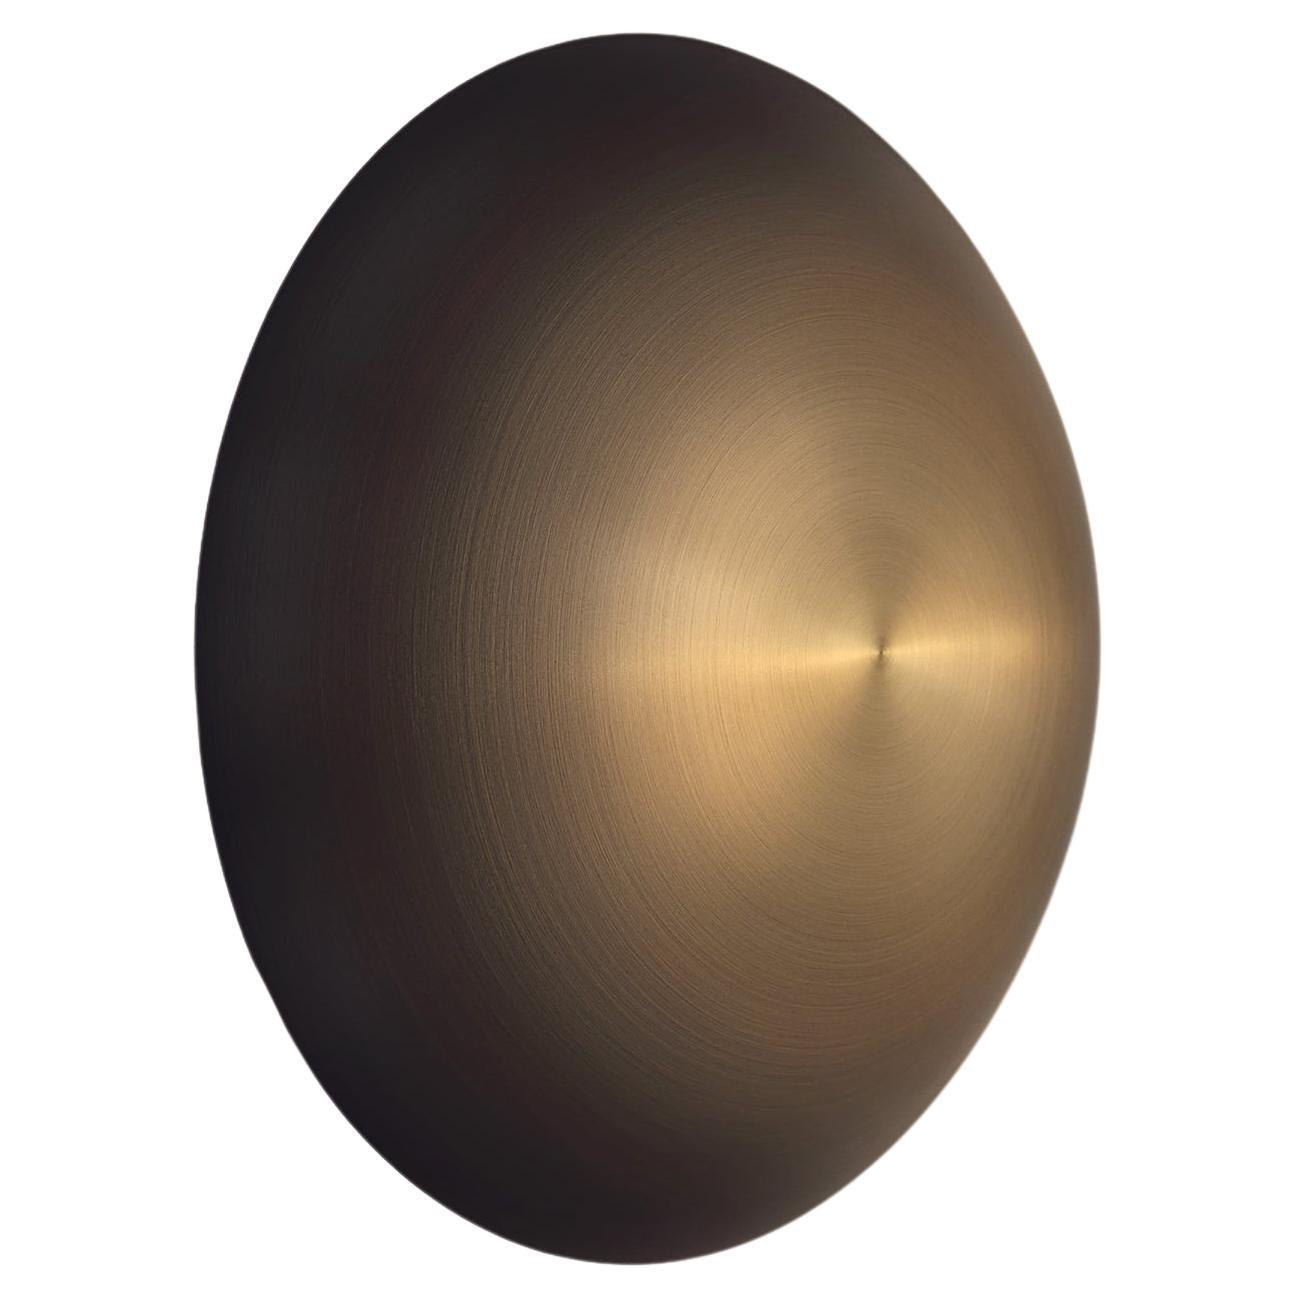 Cosmic 'Comet Ore 20' Bronze Gradient Patinated Brass Wall Light, Sconce For Sale